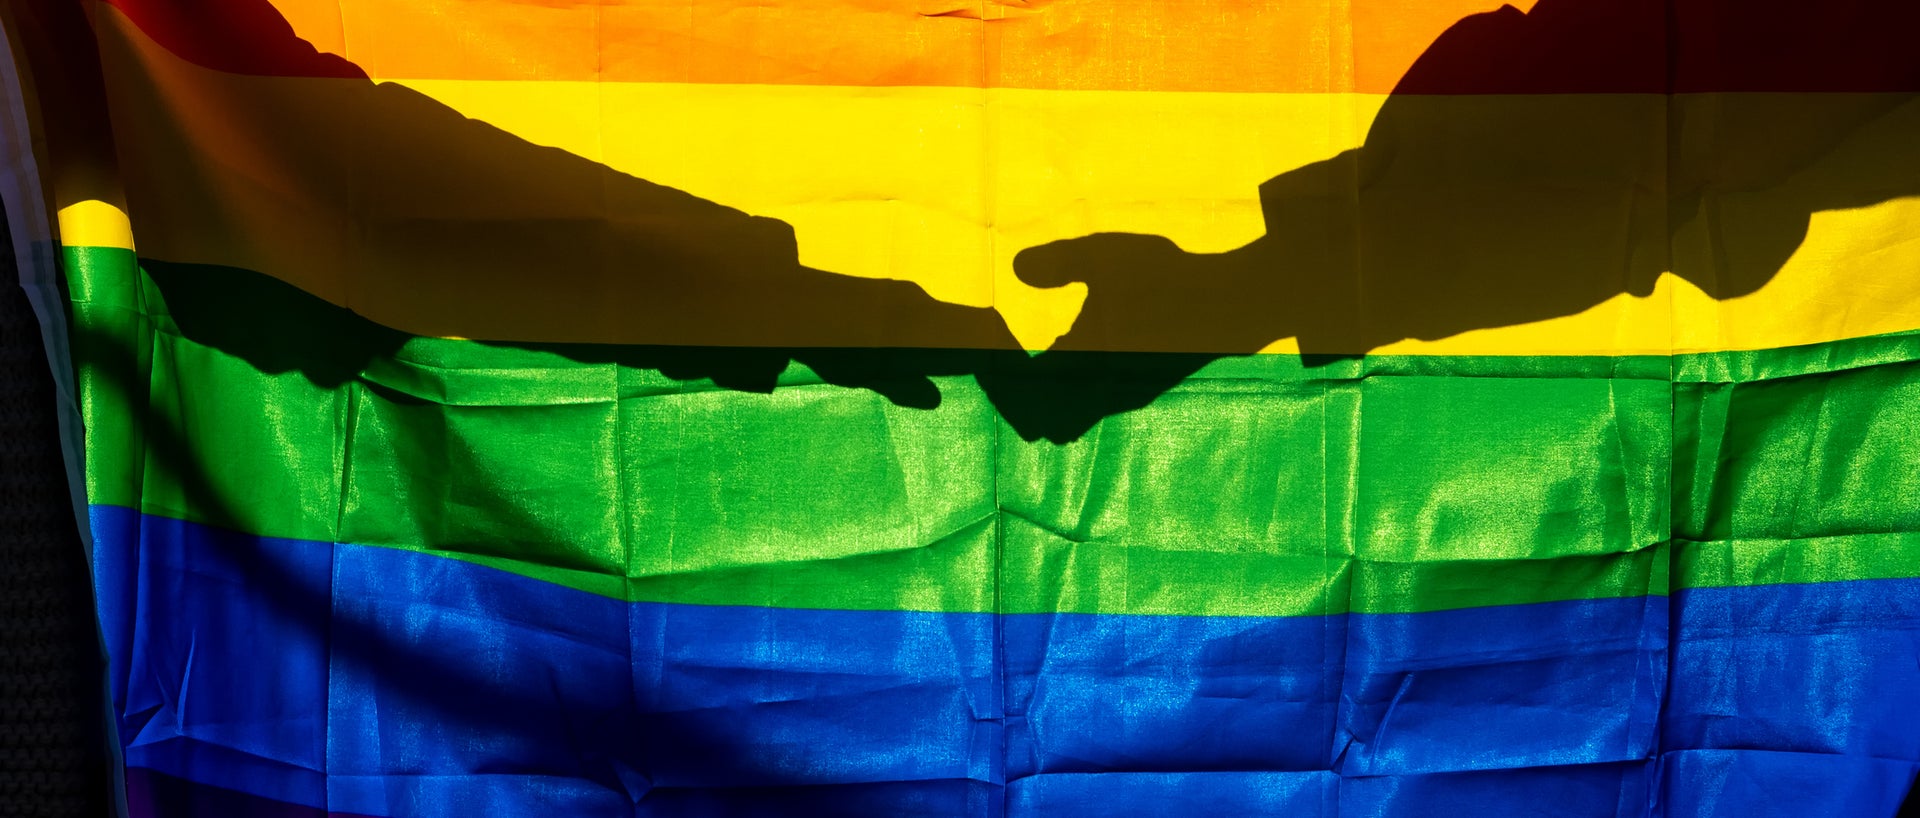 LGBTQ Pride flag with shadow of hands behind